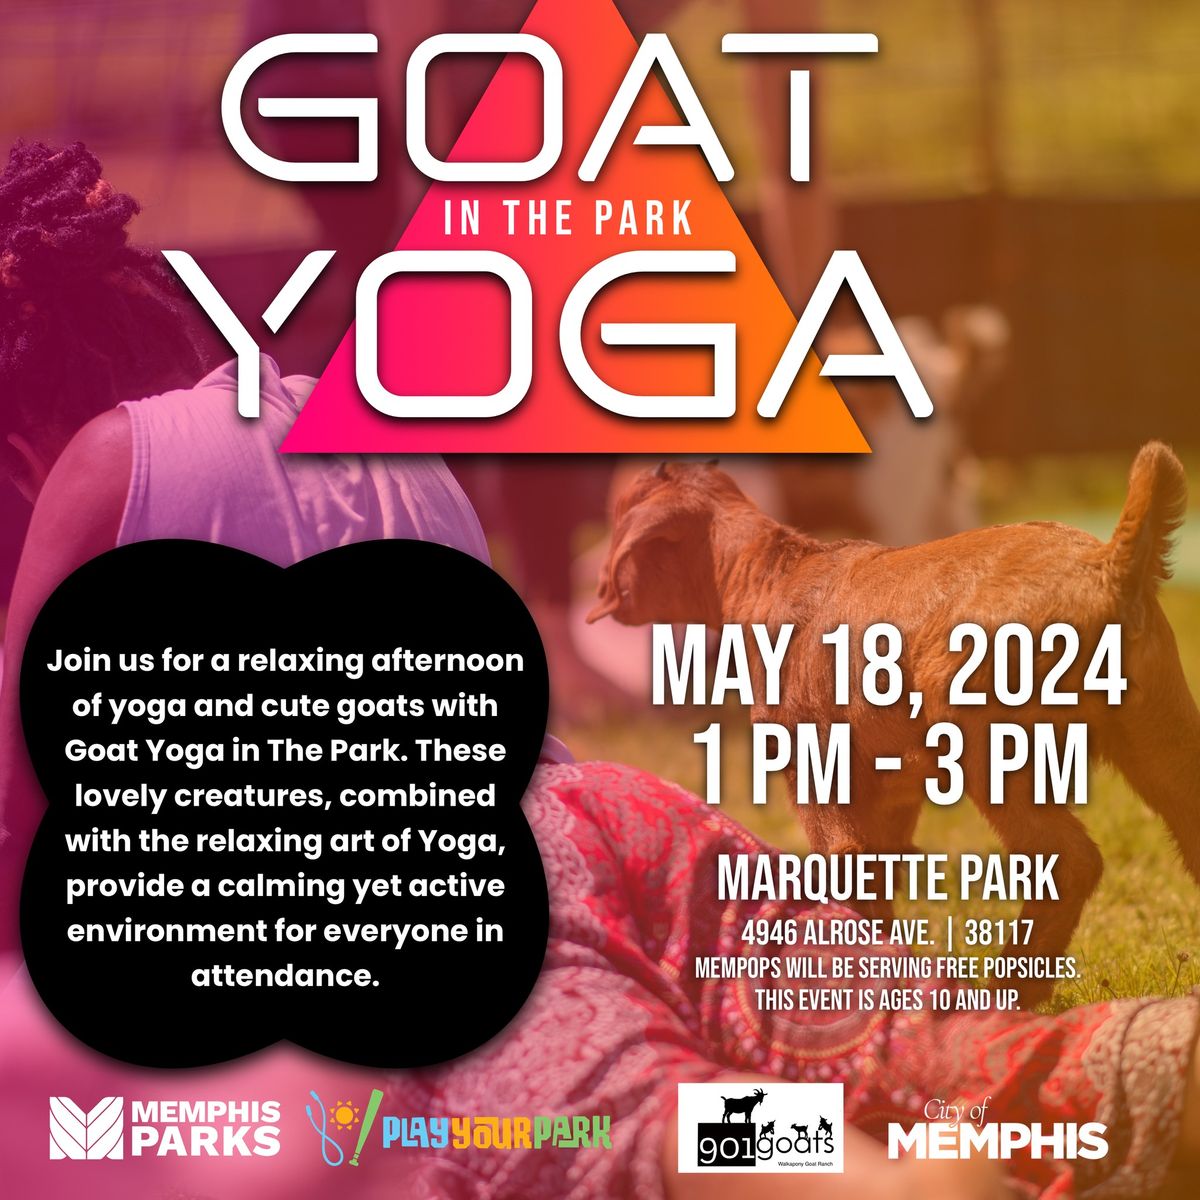 Goat Yoga in the Park